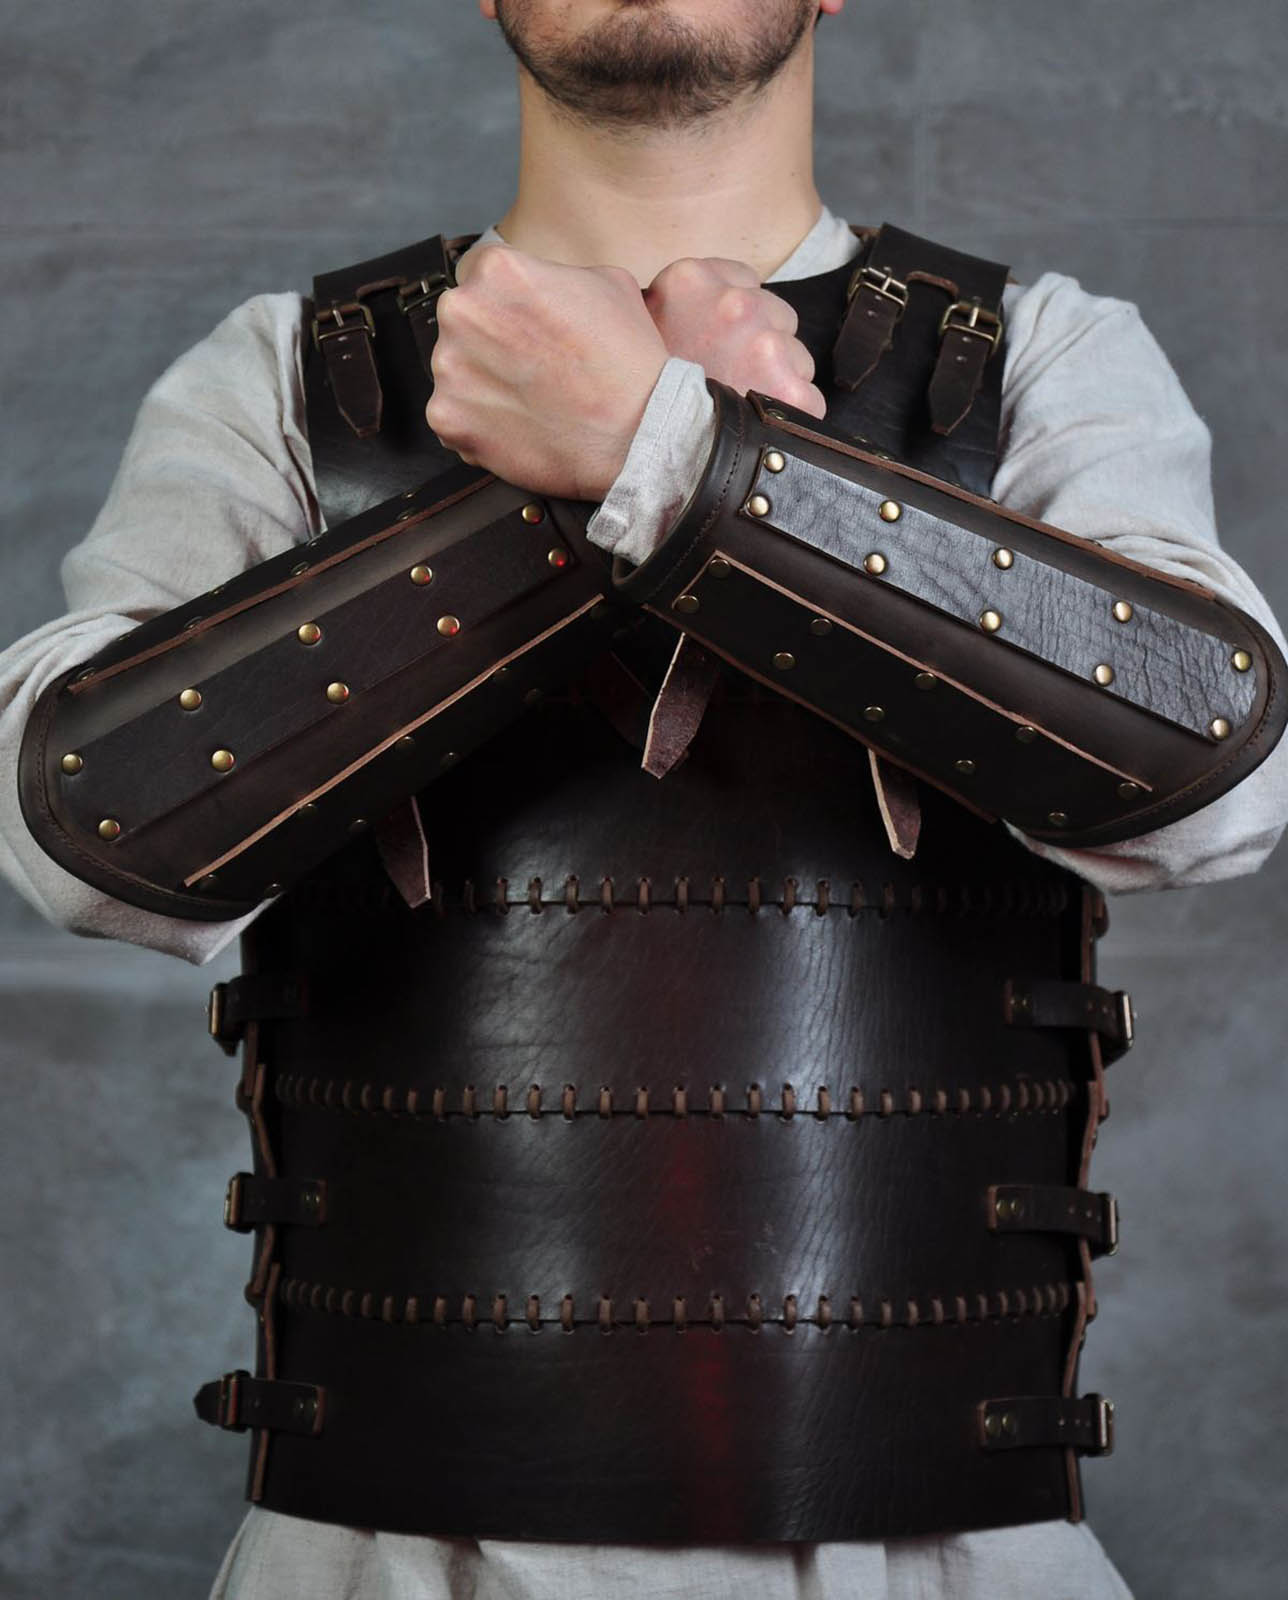 Leather bracers from armor costume in style of Bëor the Old